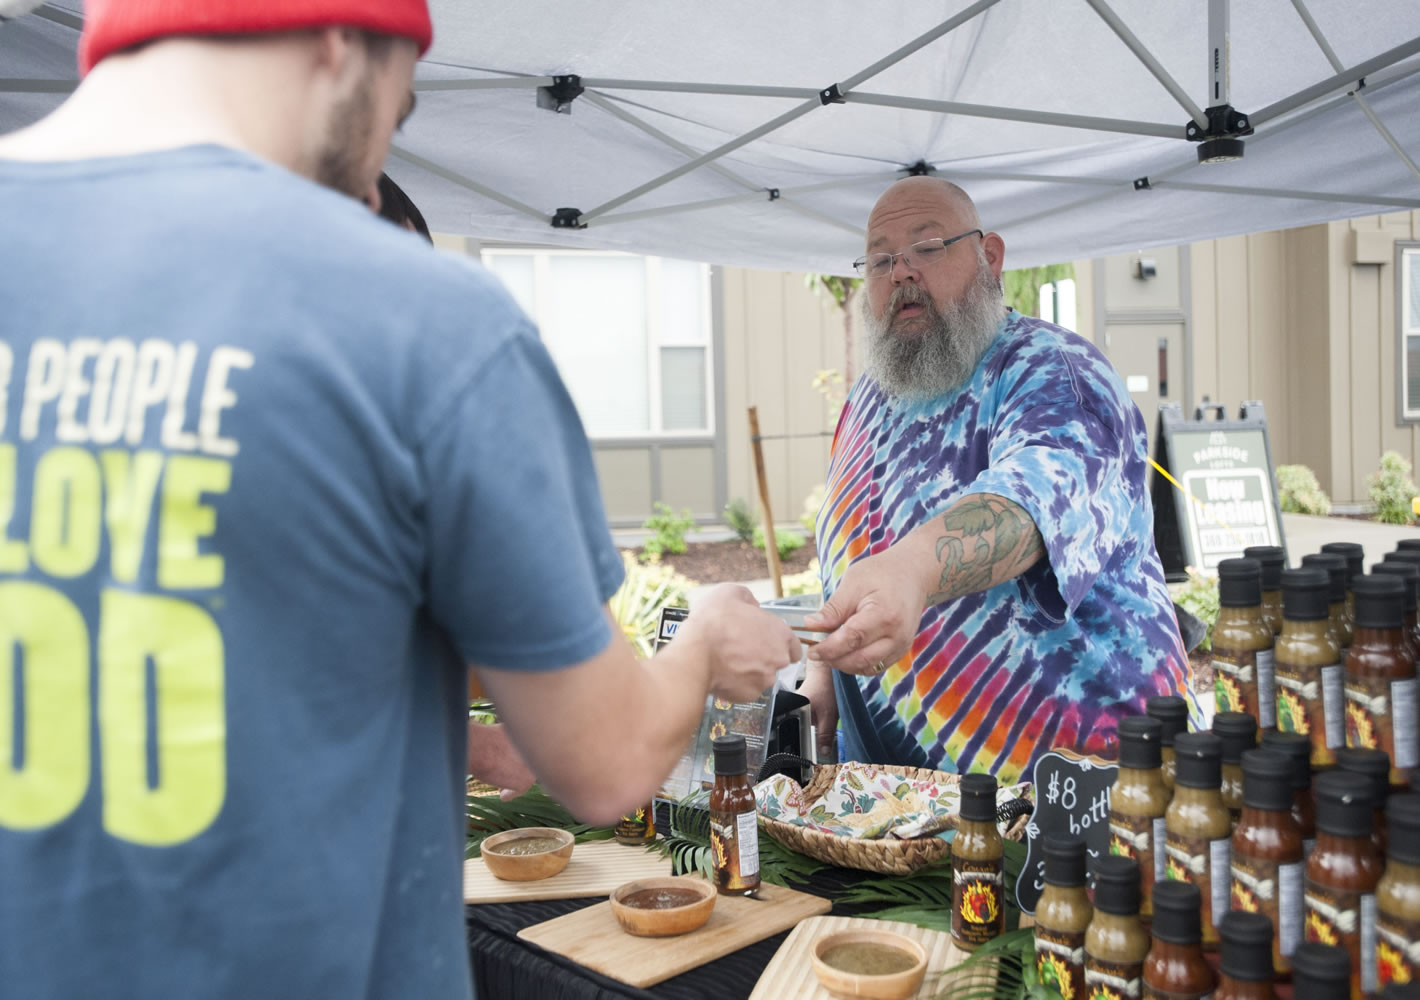 Hot sauce maker Conan Miller gives a customer a sample at his booth at a Farmers Market at Columbia Tech Center in Vancouver on Thursday.